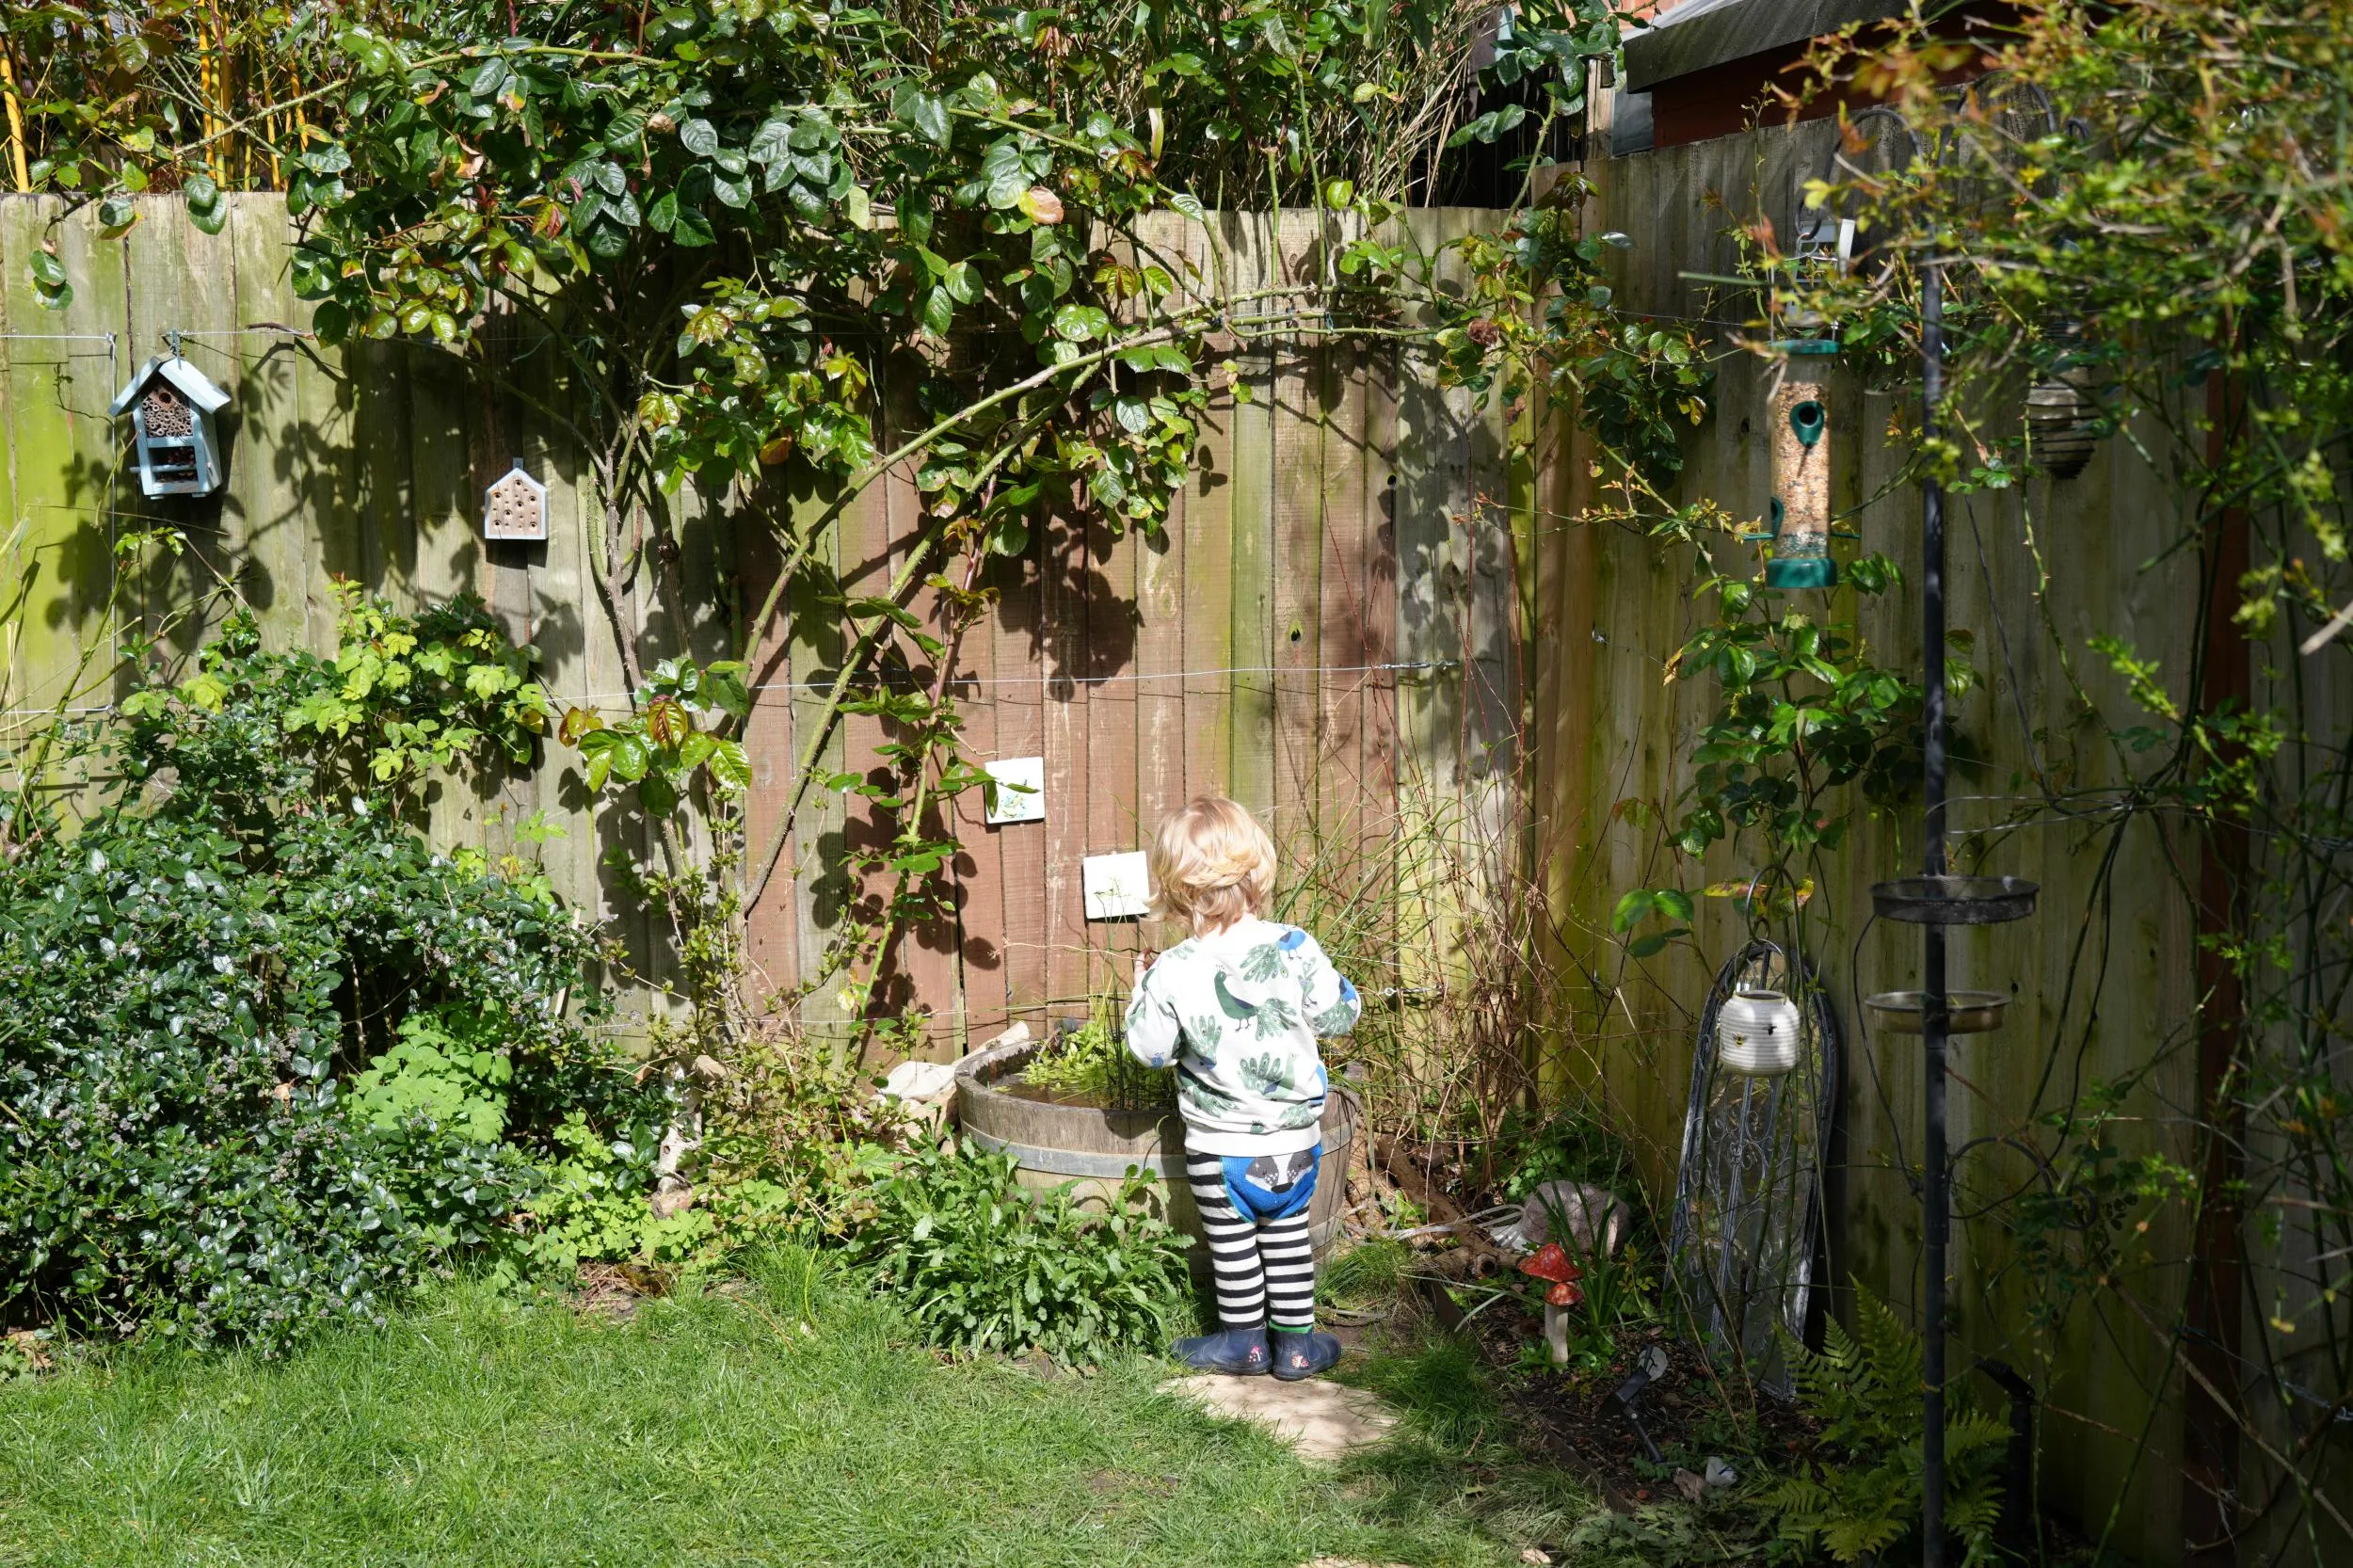 A small child investigating a container wildlife pond in the corner of a garden